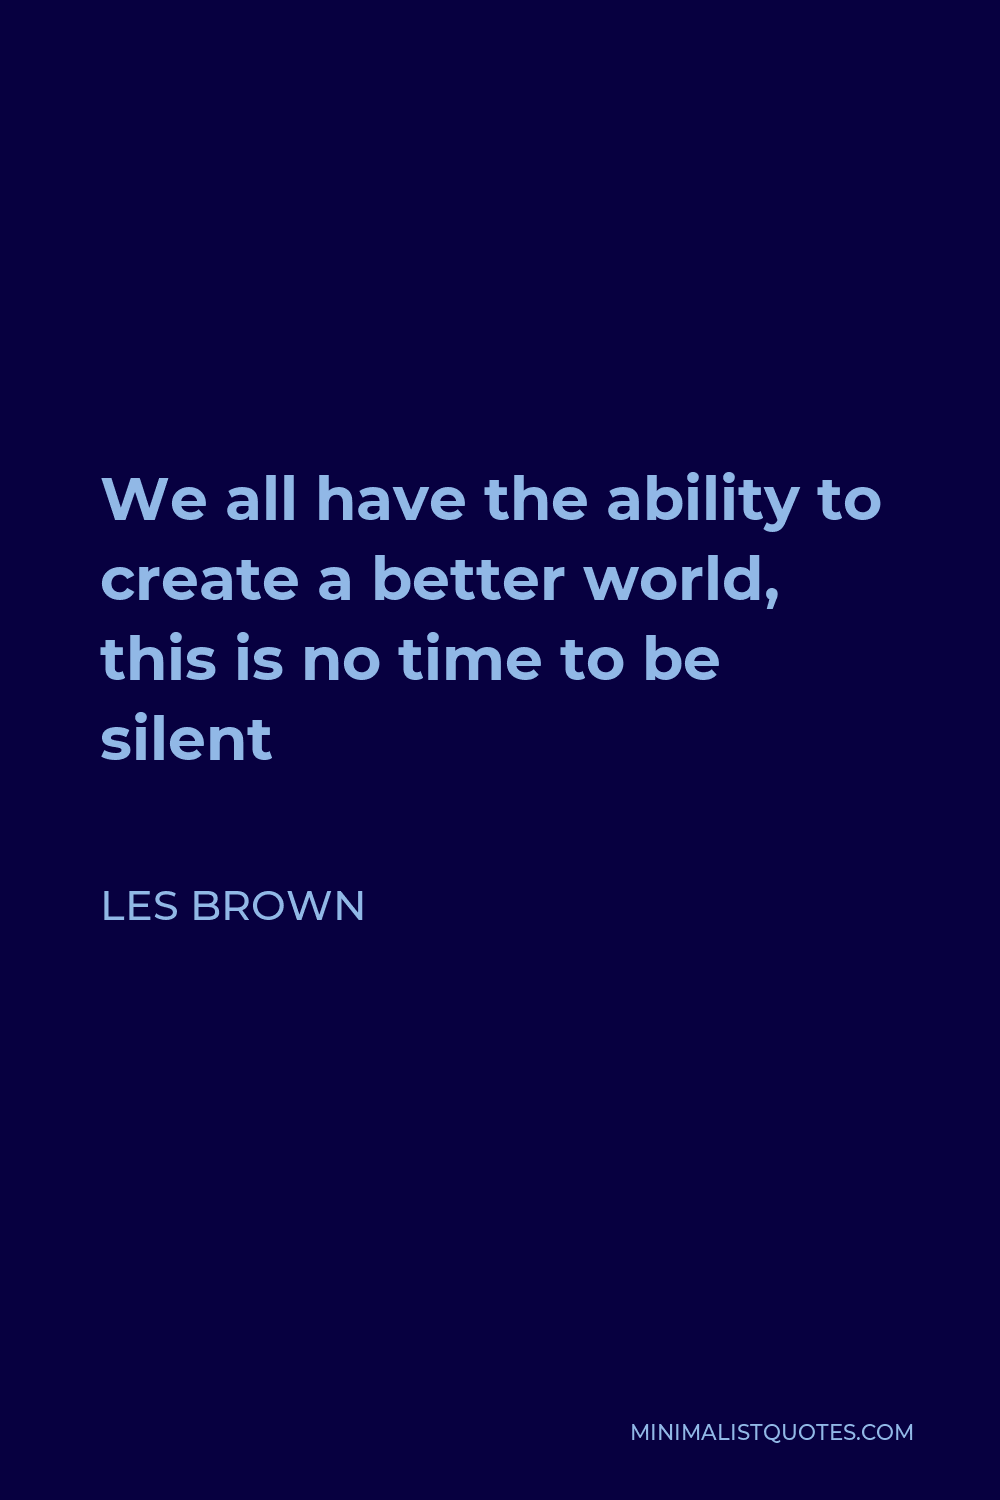 Les Brown Quote - We all have the ability to create a better world, this is no time to be silent